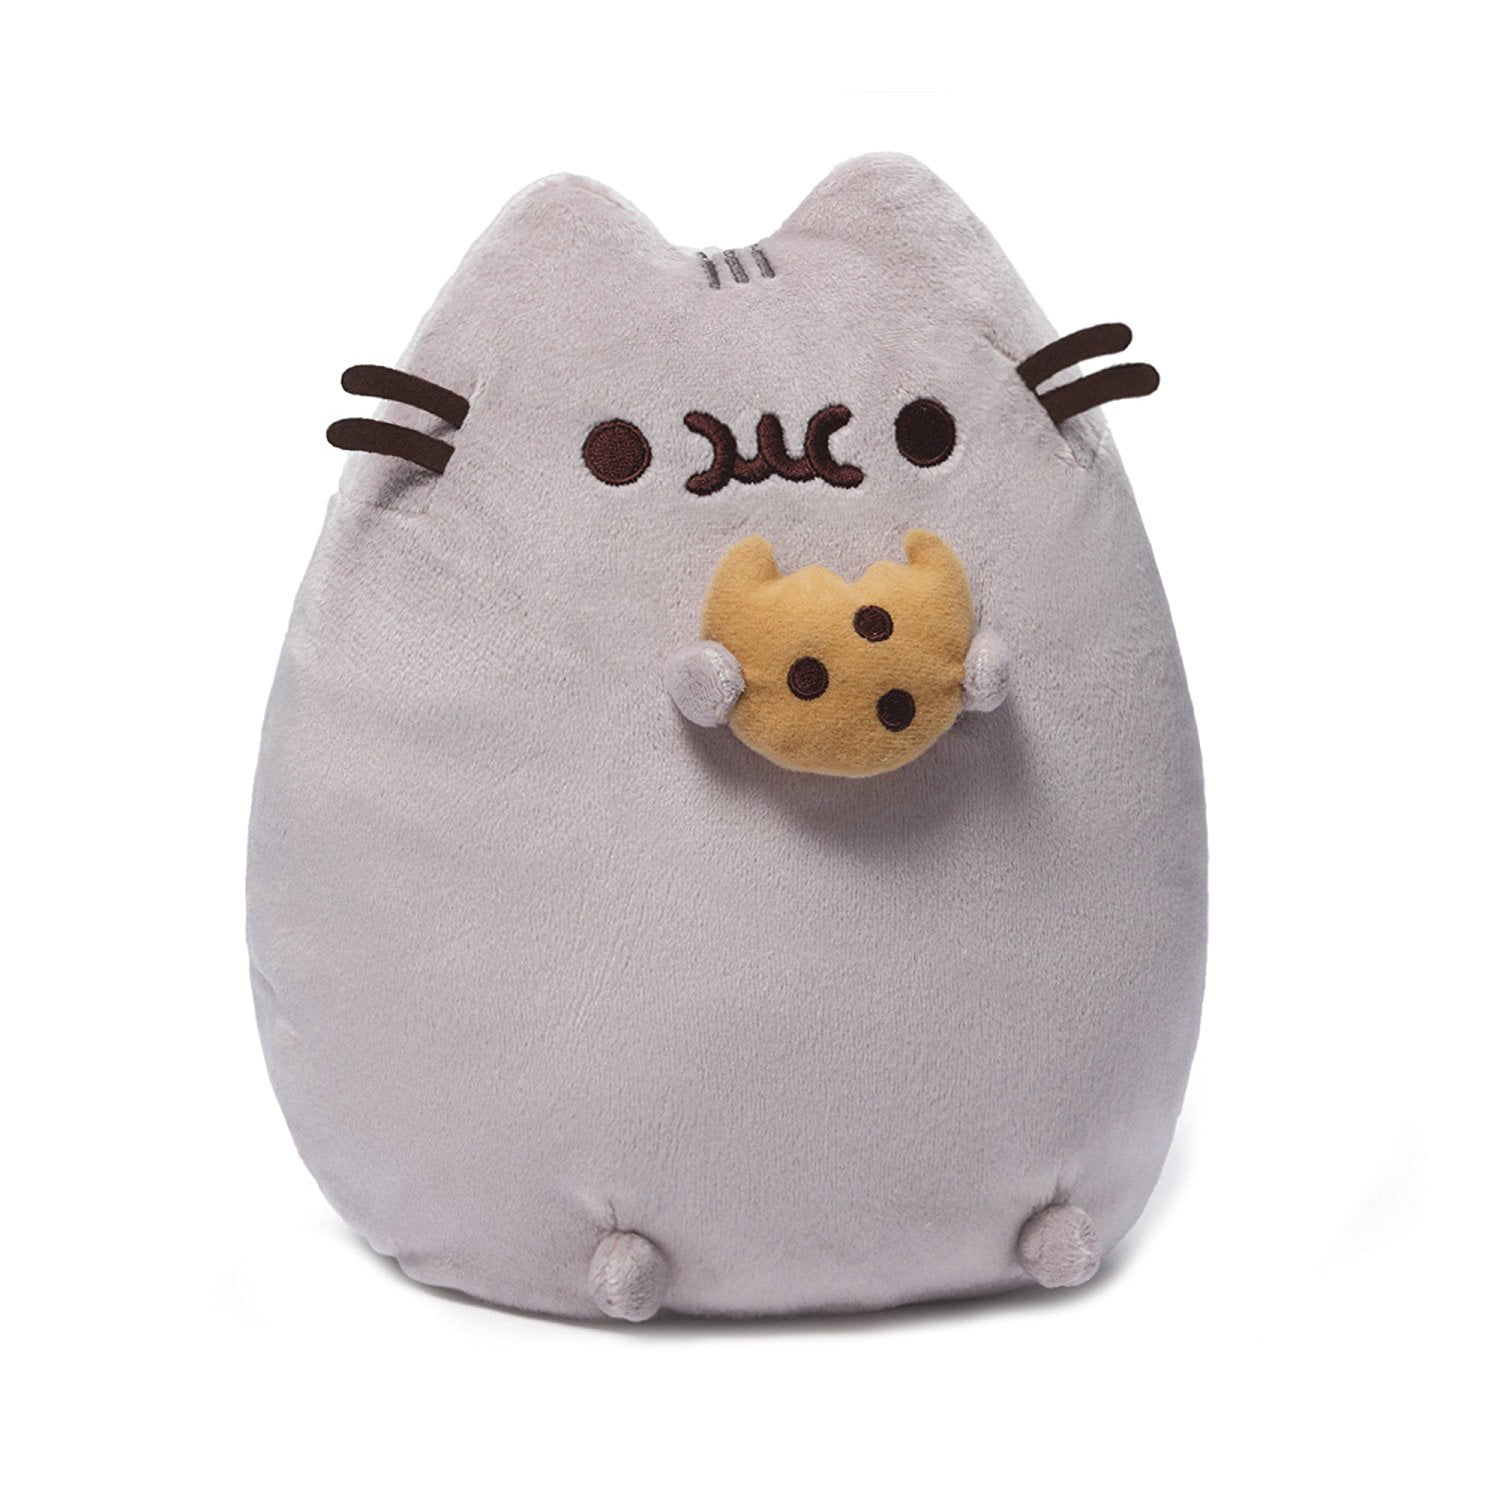 Pusheen Plush with Cookie, Upright 